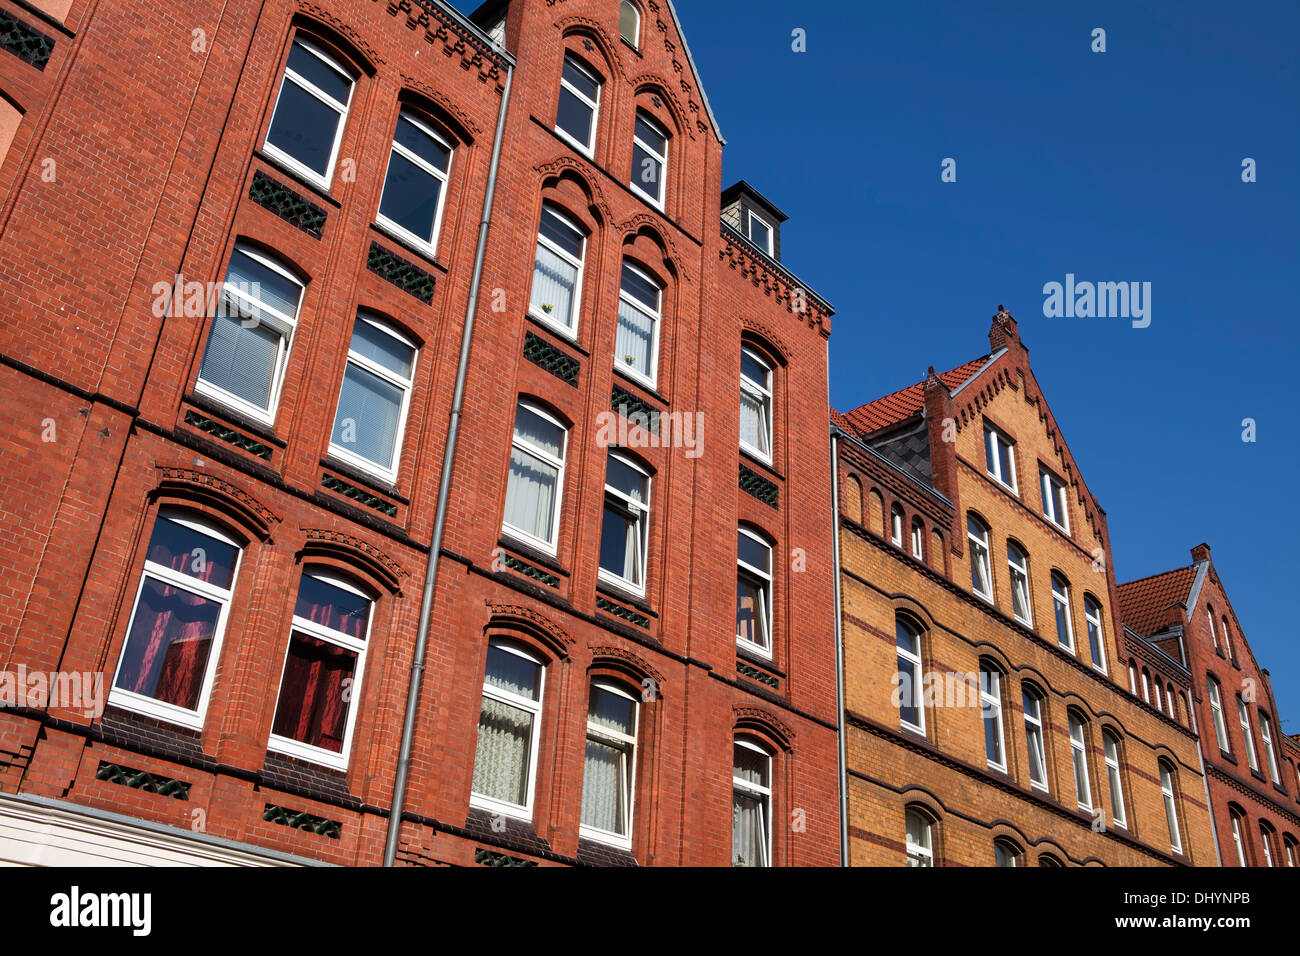 Historical architecture, Linden, Hanover, Lower Saxony, Germany, Europe, Stock Photo